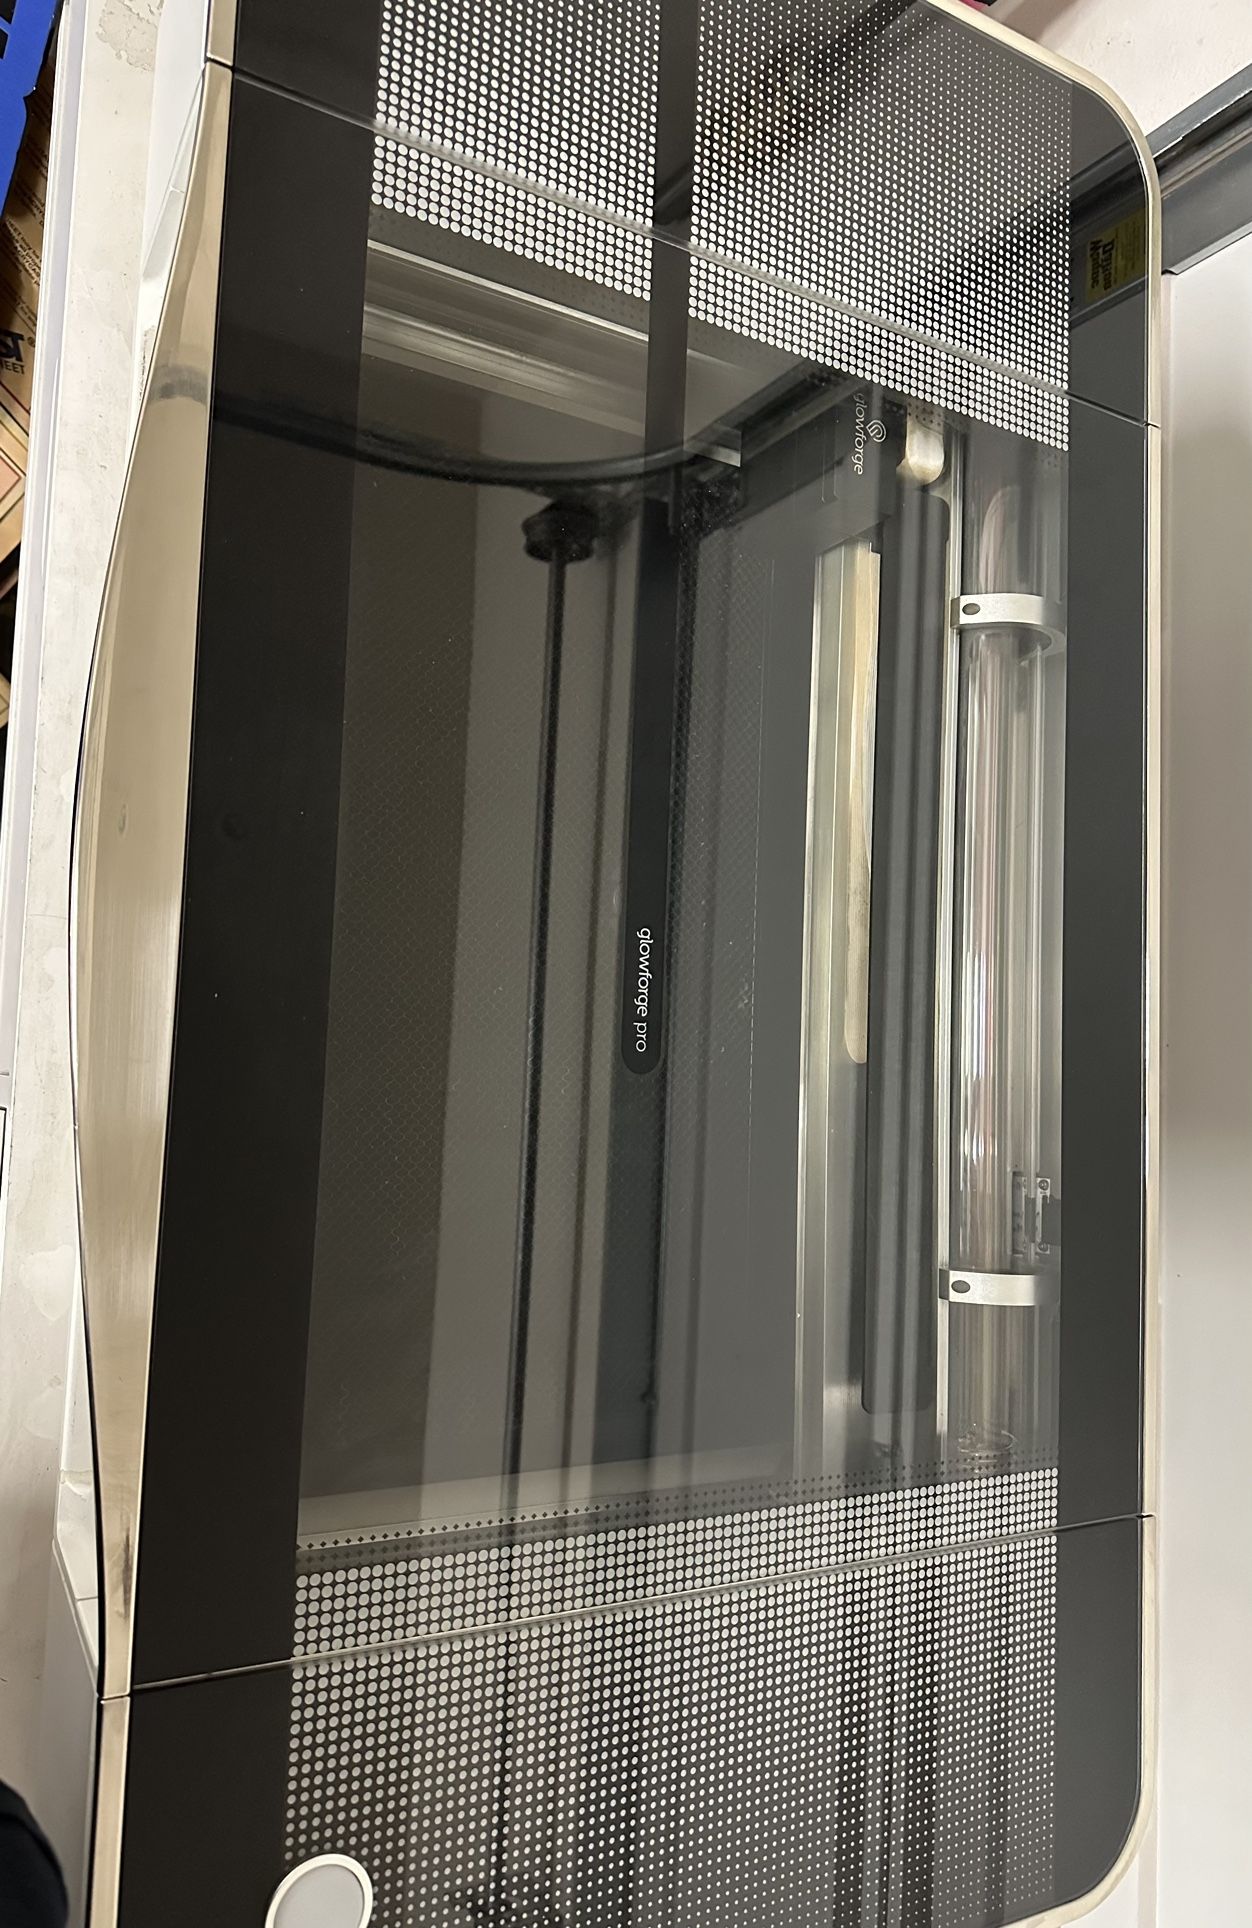 Glowforge Pro with Filter